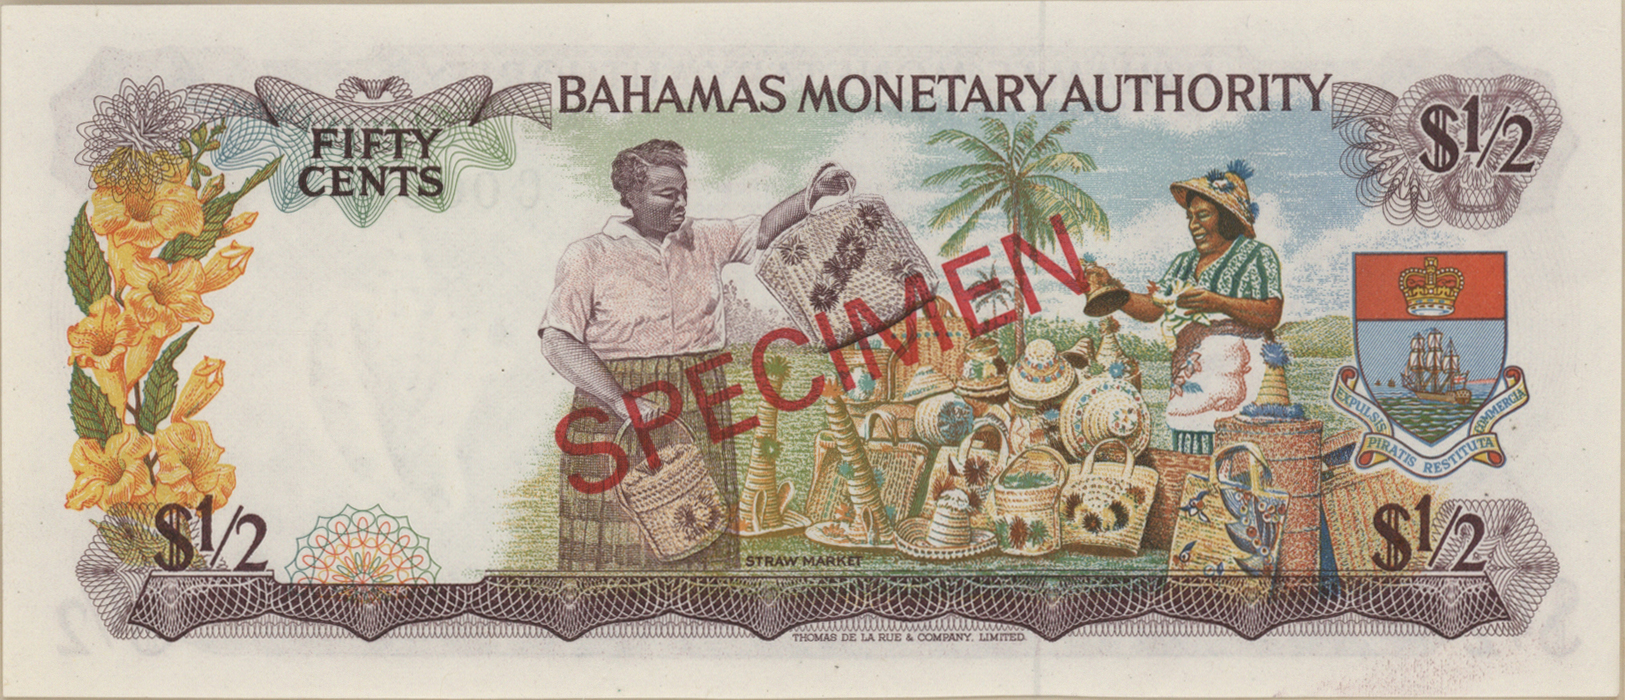 00222 Bahamas: Complete Set Of 8 Specimen Notes From 1/2 To 100 Dollars P. 26s-33s Without Cancellation Holes, Zero Seri - Bahamas